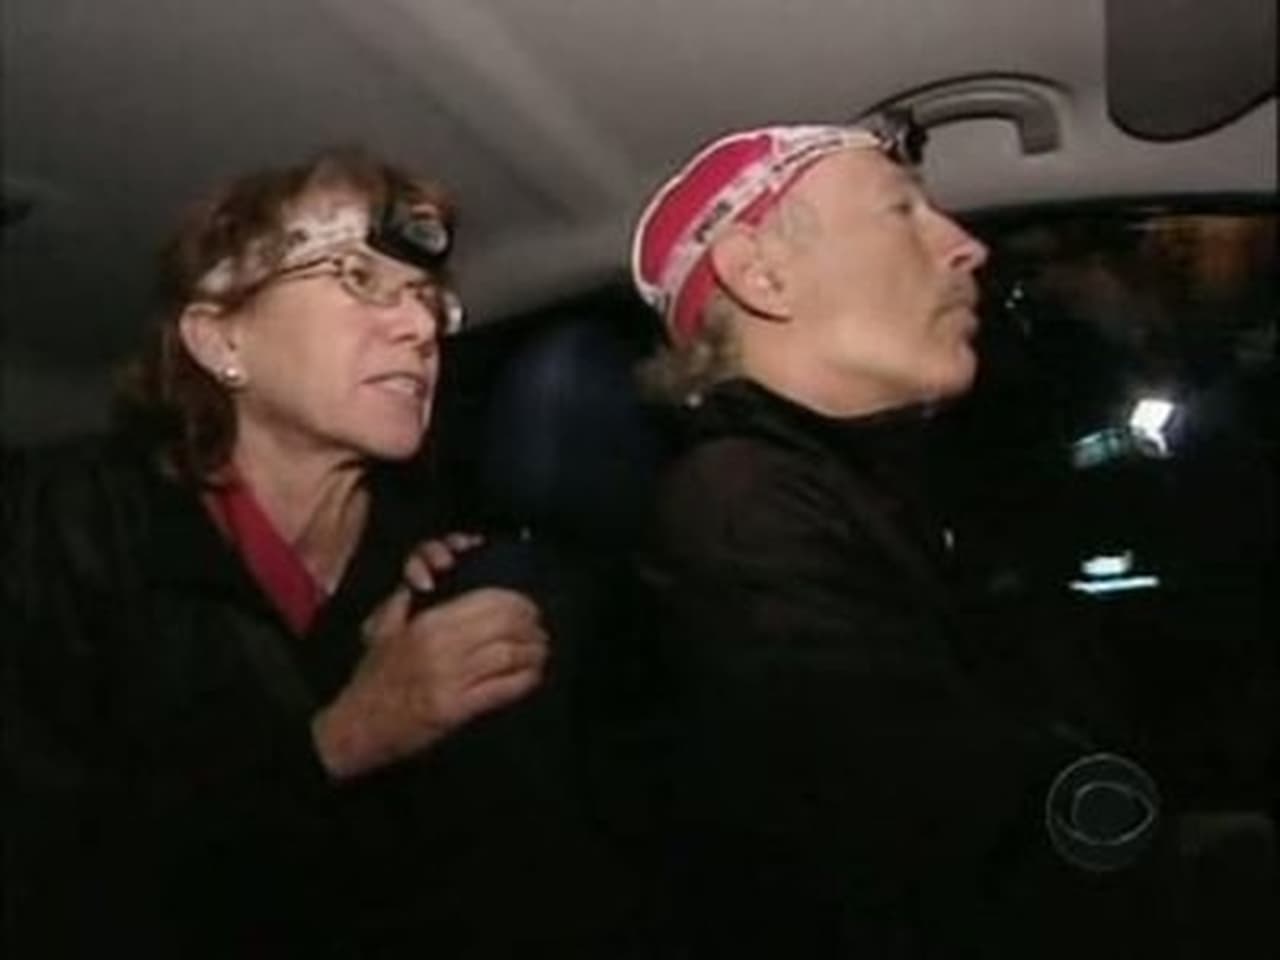 The Amazing Race - Season 9 Episode 6 : Sleep Deprivation Is Really Starting to Irritate Me